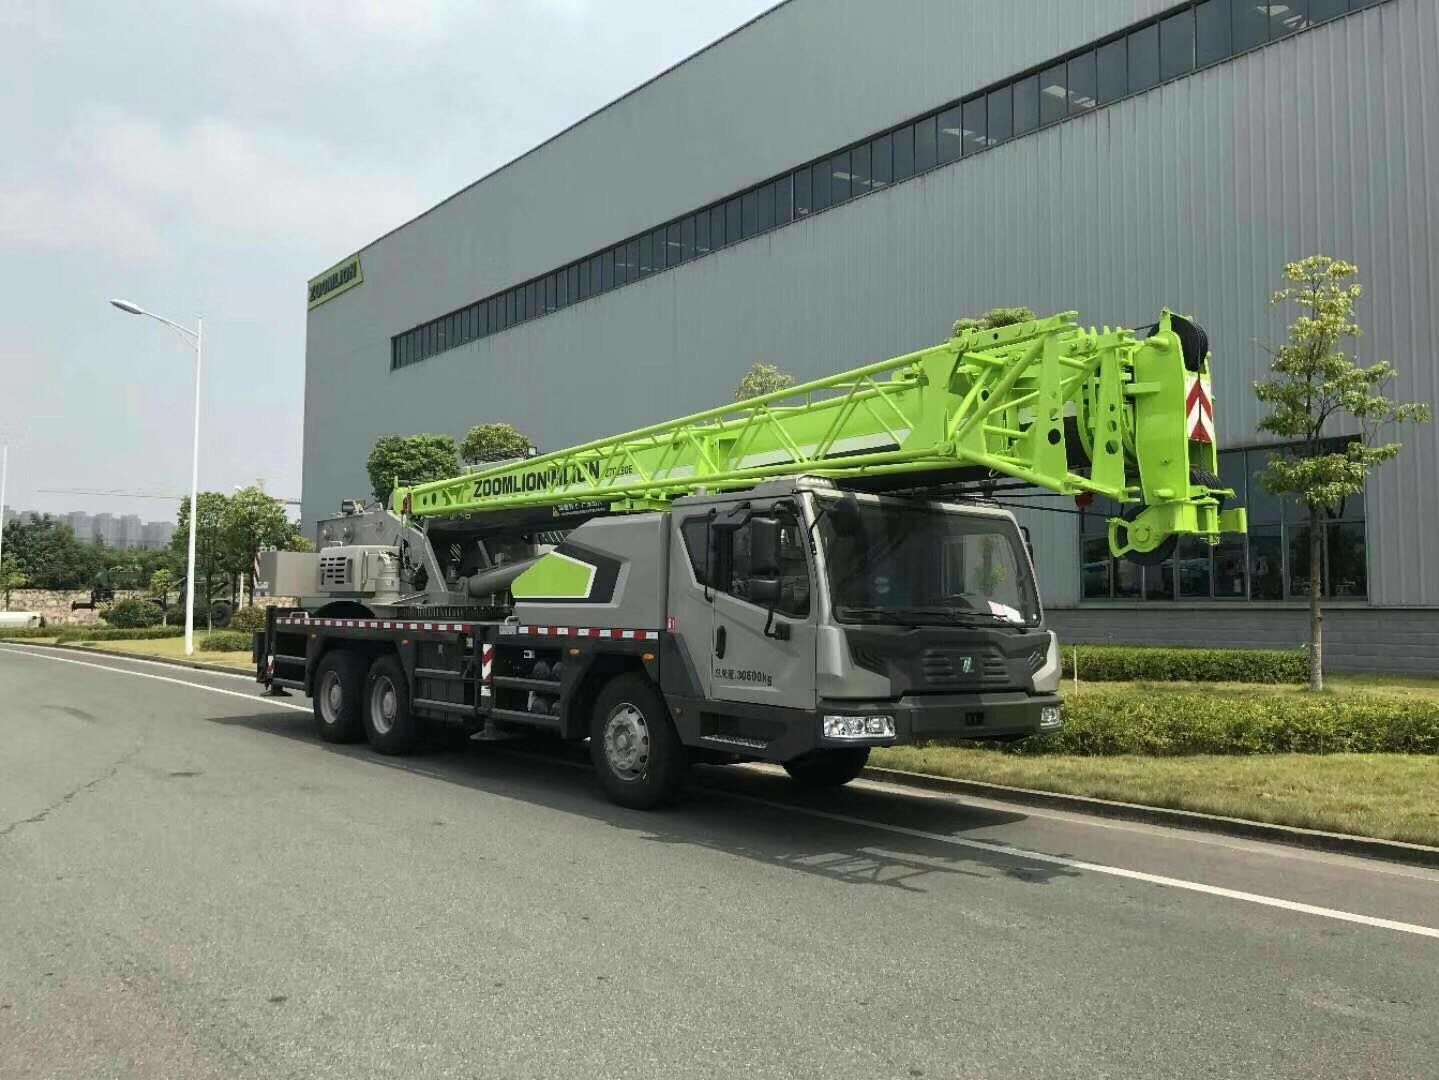 Zoomlion Rhd 55 Ton Mobile Crane Qy55V532.2/Ztc550V532 Truck Crane with 5 Section Boom